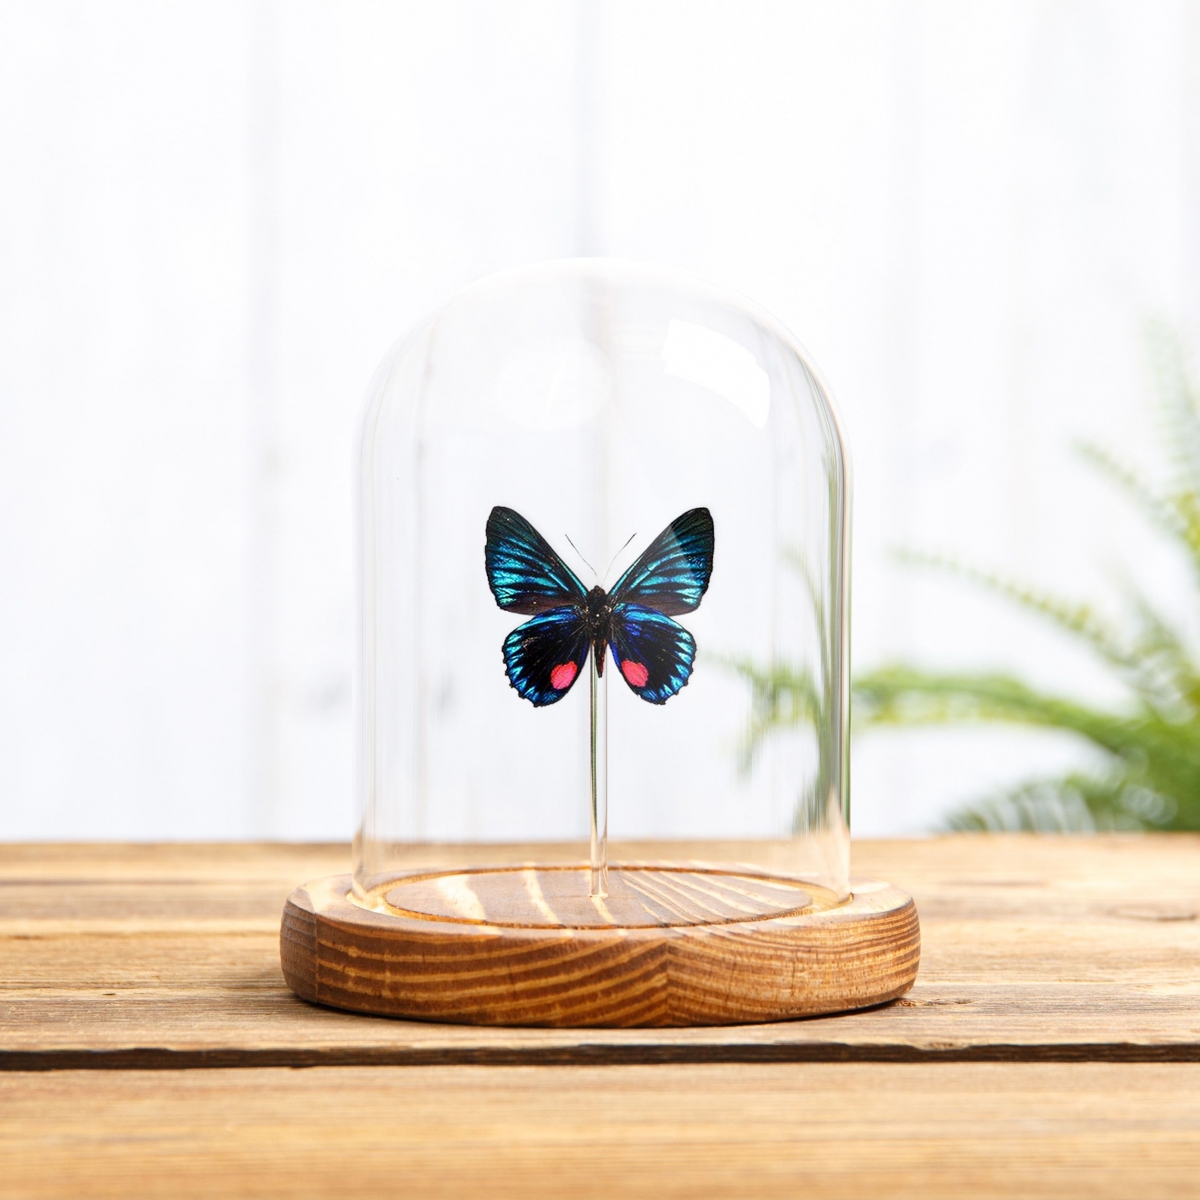 Necyria duellona Butterfly in Glass Dome with Wooden Base